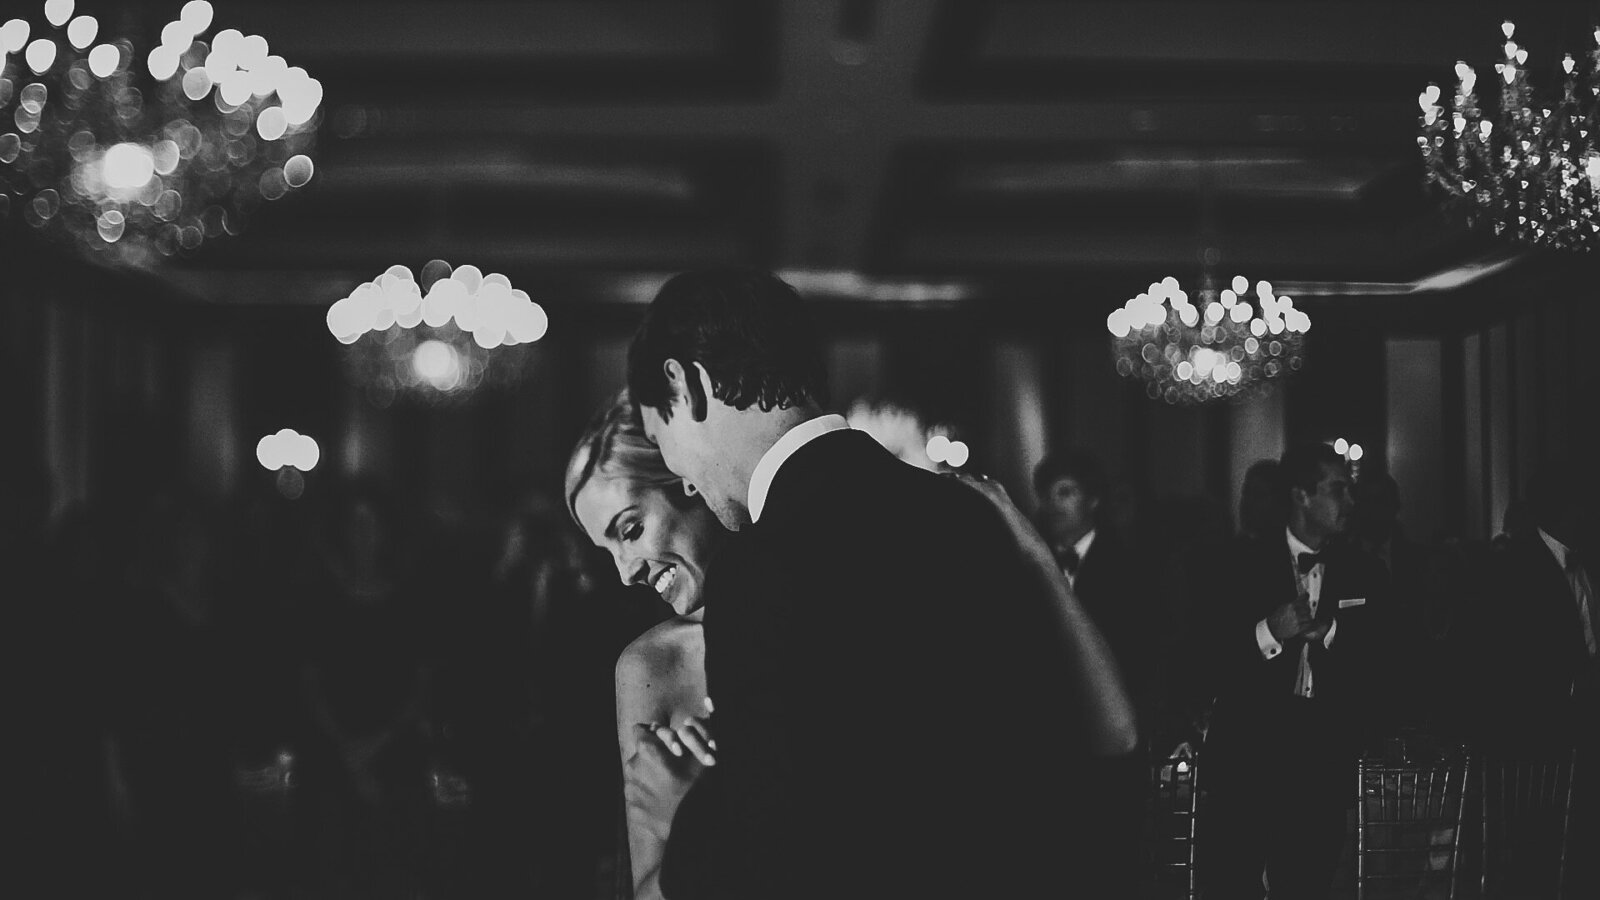 A Texas wedding videographer captures the special moment as a bride and groom share their first dance at their wedding.